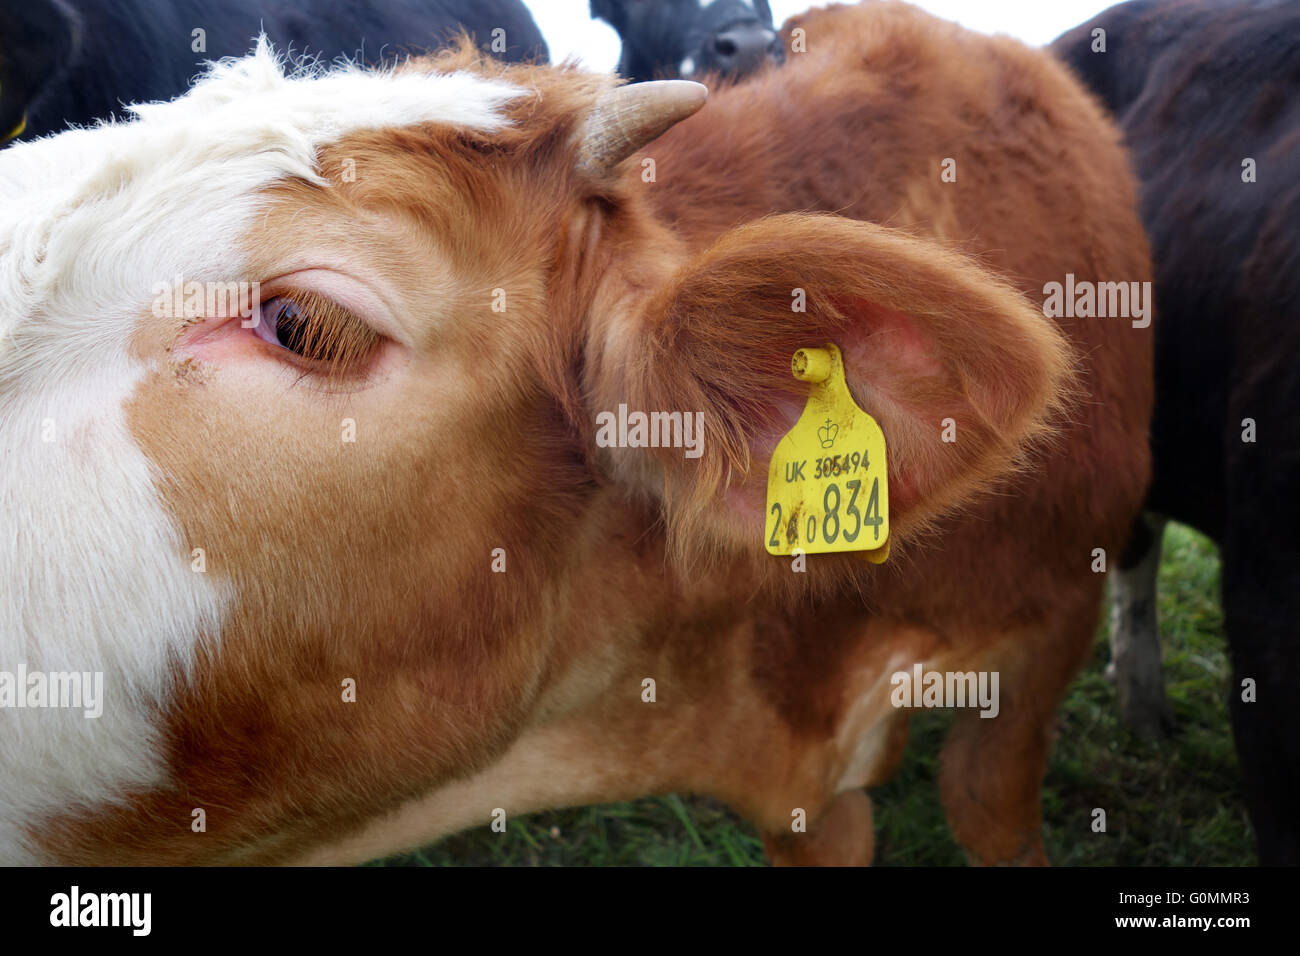 Domestic cattle in England closeup of eye and yellow ear tag for official identification of cattle in Europe. Stock Photo